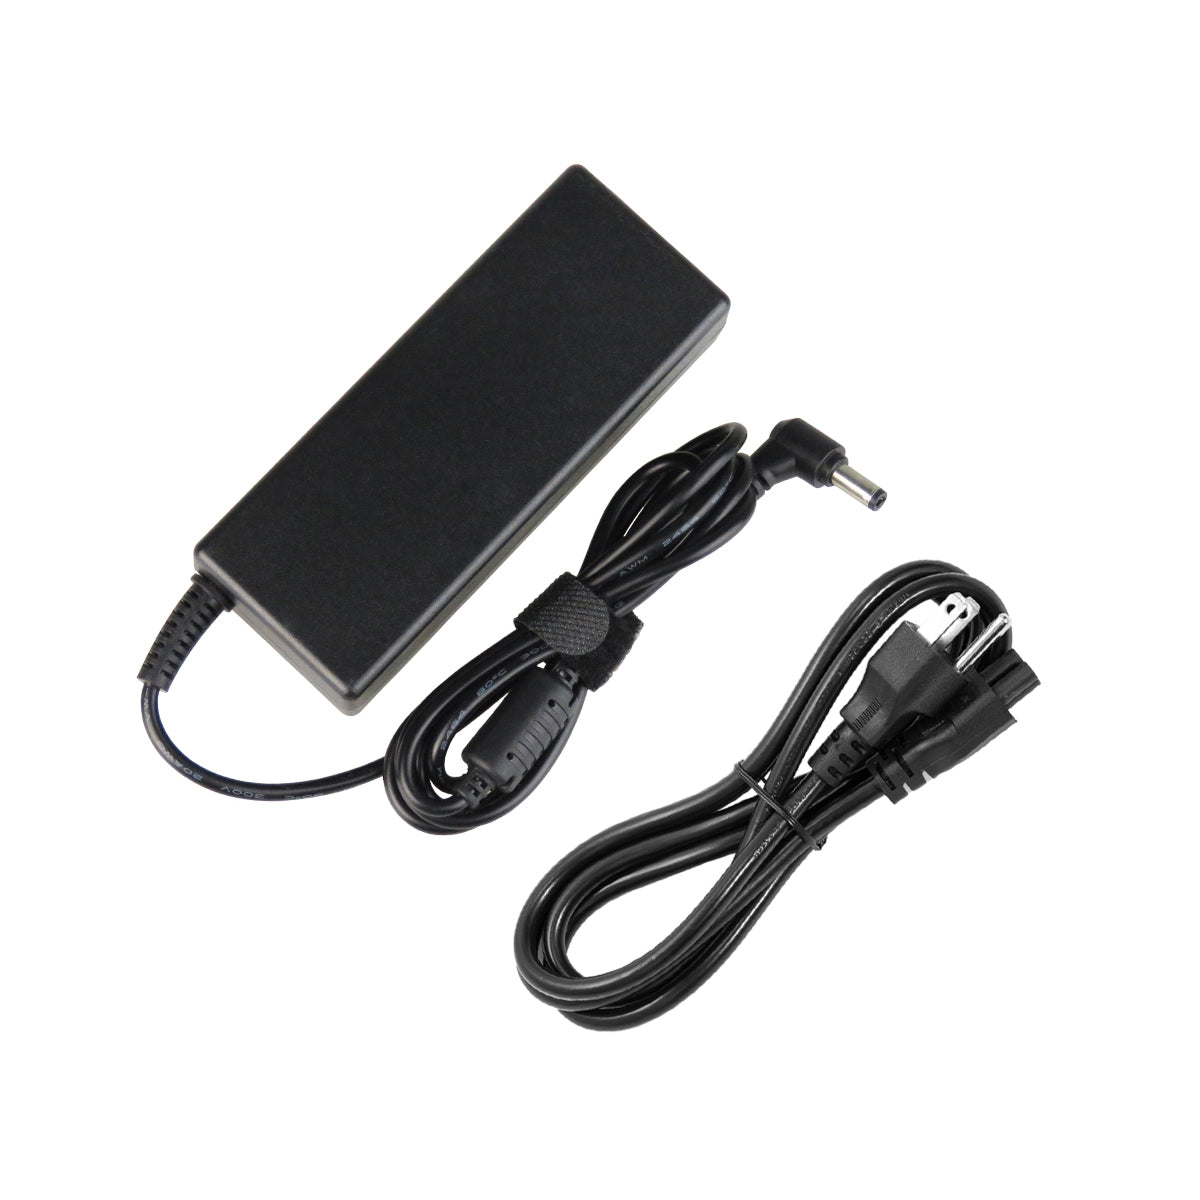 AC Adapter Charger for ASUS N43JM Notebook.